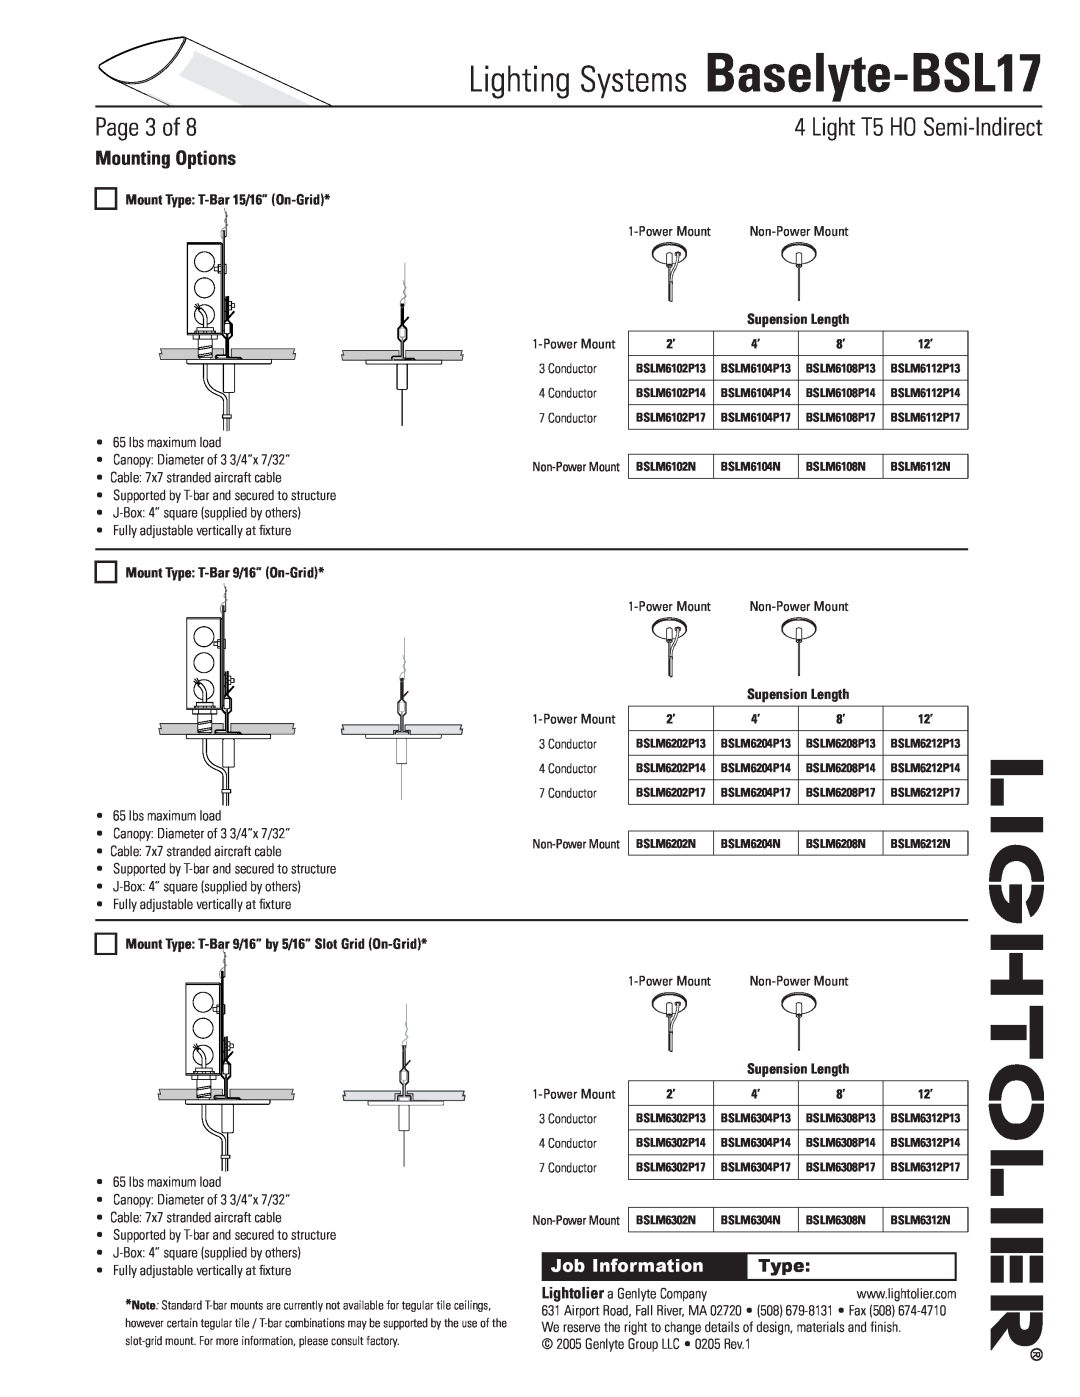 Lightolier Baselyte-BSL17 Mounting Options, Mount Type T-Bar15/16” On-Grid, Supension Length, Page of, Job Information 